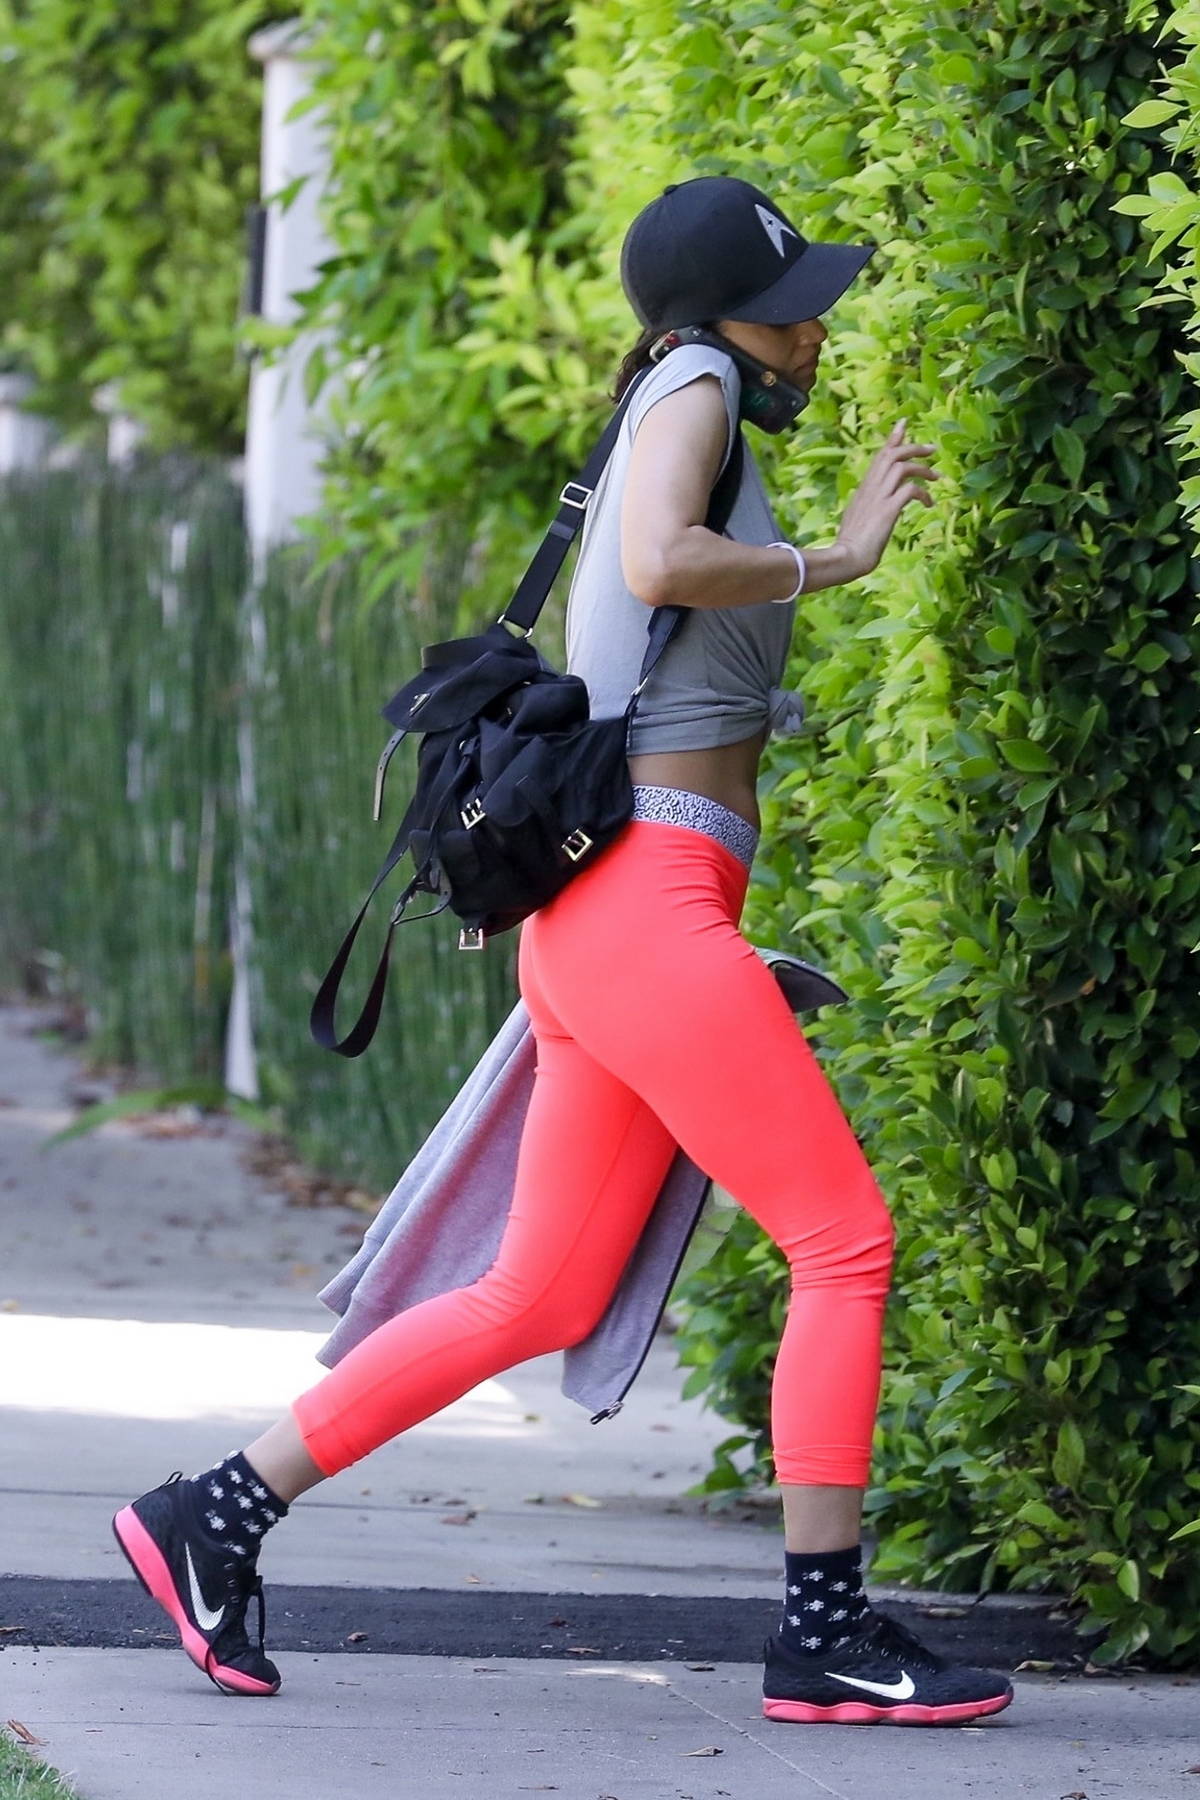 https://www.celebsfirst.com/wp-content/uploads/2021/05/sofia-boutella-flashes-her-abs-in-bright-pink-nike-leggings-as-she-attends-her-pilates-class-in-west-hollywood-california-030521_15.jpg